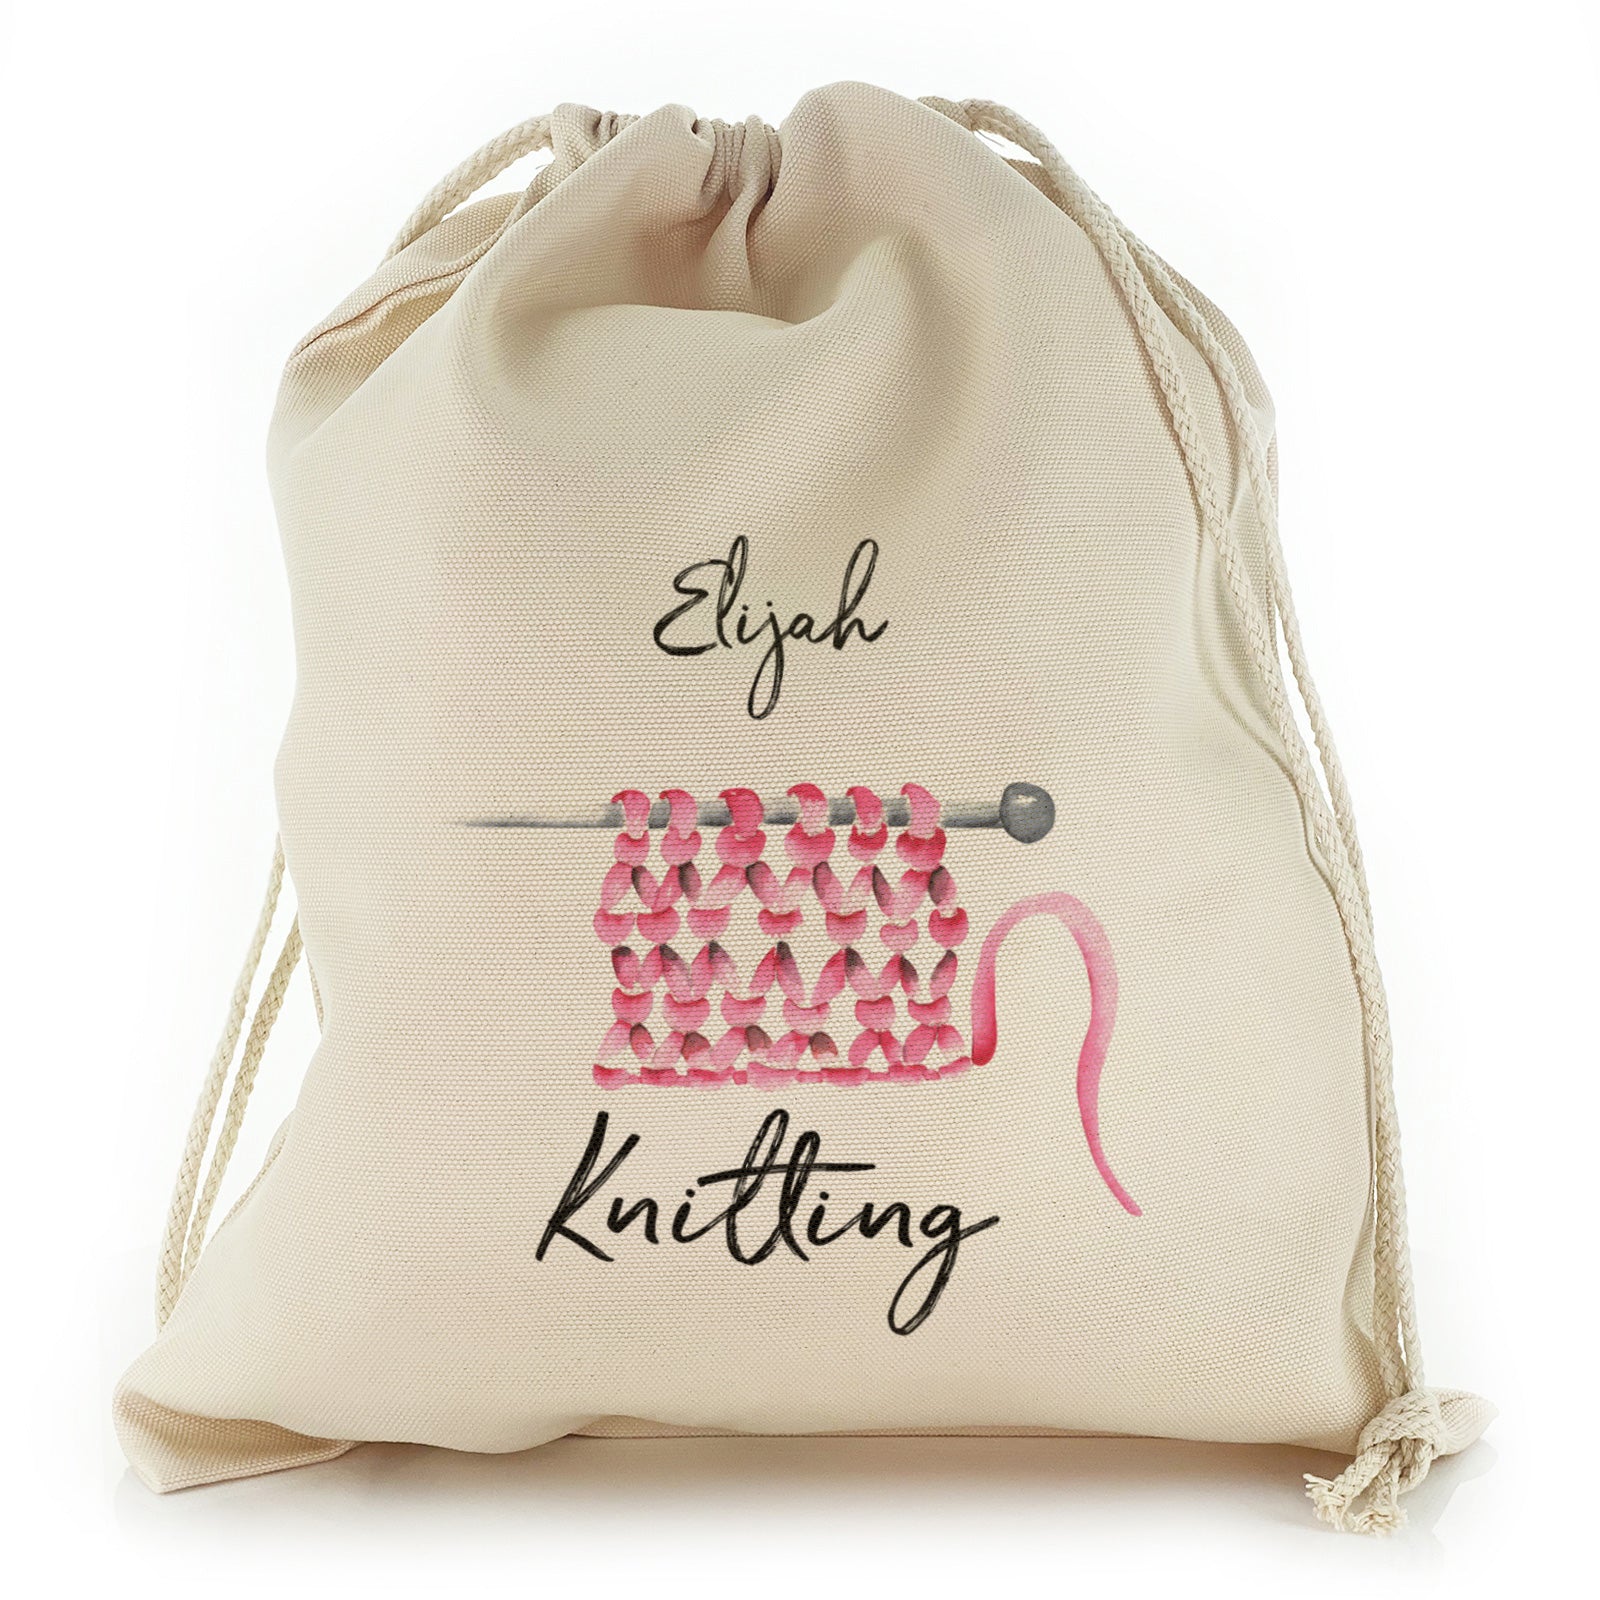 Personalised Canvas Sack with Stylish Text on Pink Knitted Yarn Design